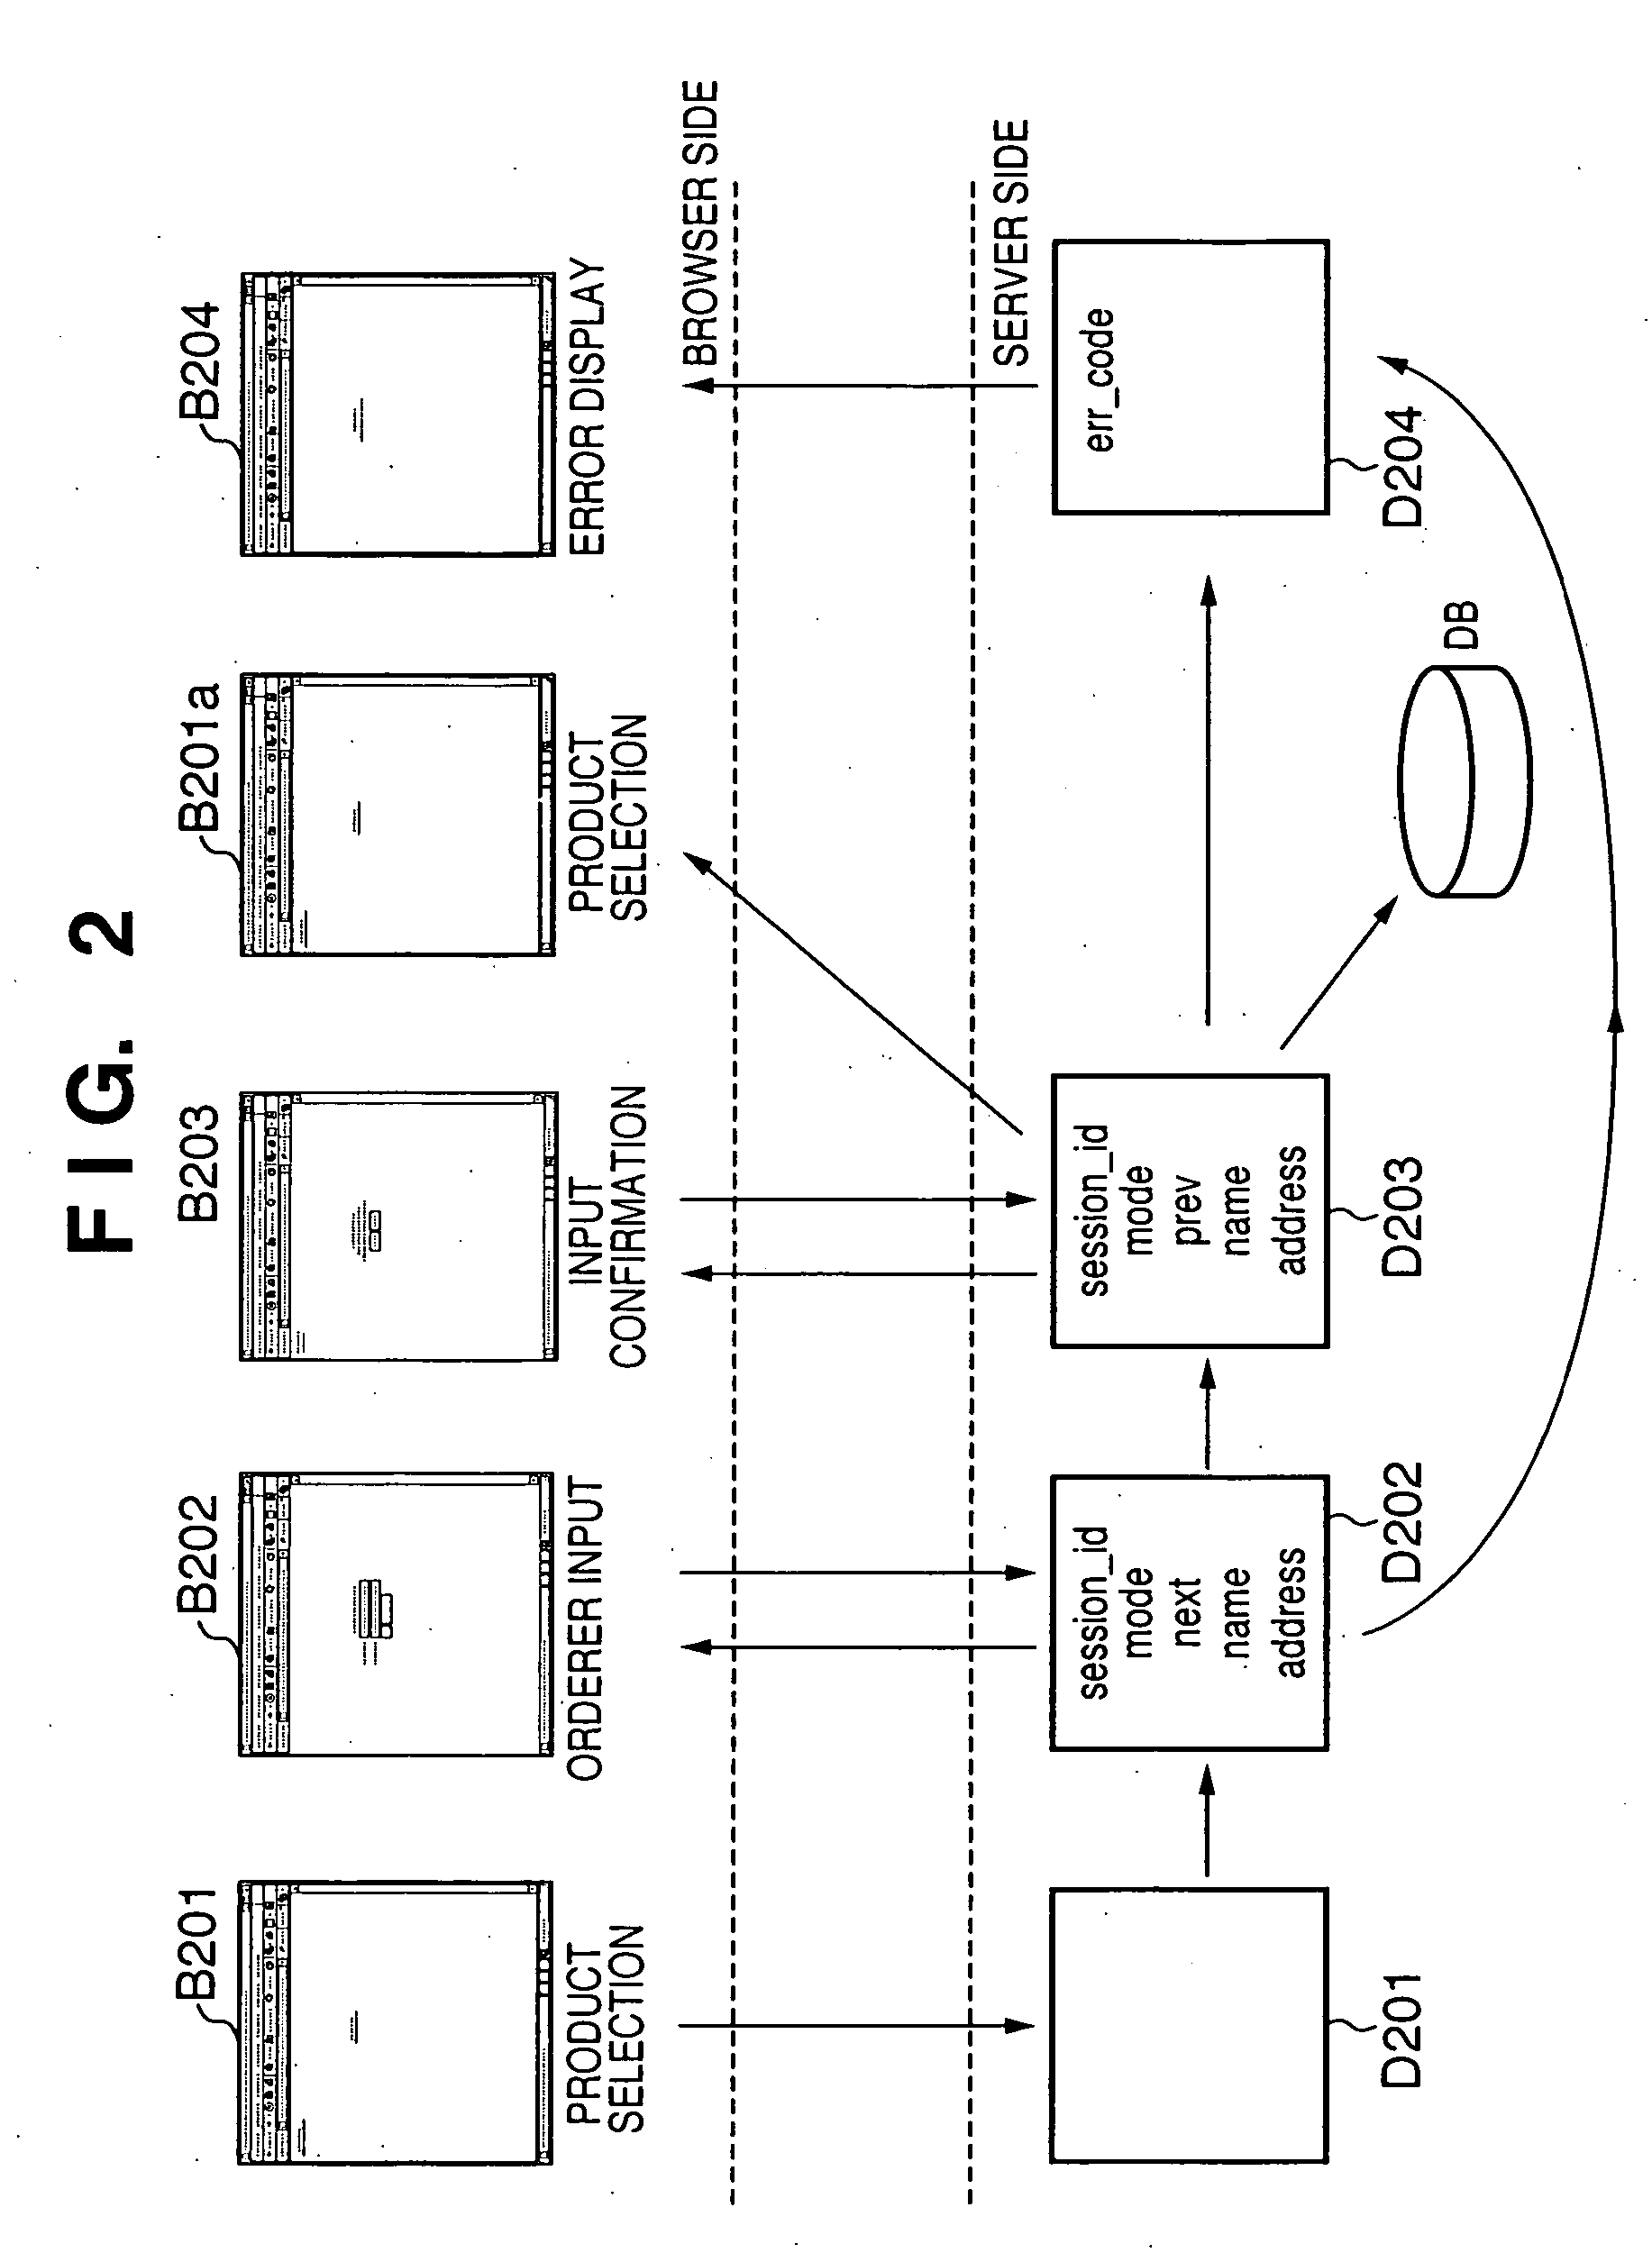 Server apparatus for providing display screen through network, control method therefor, and program therefor